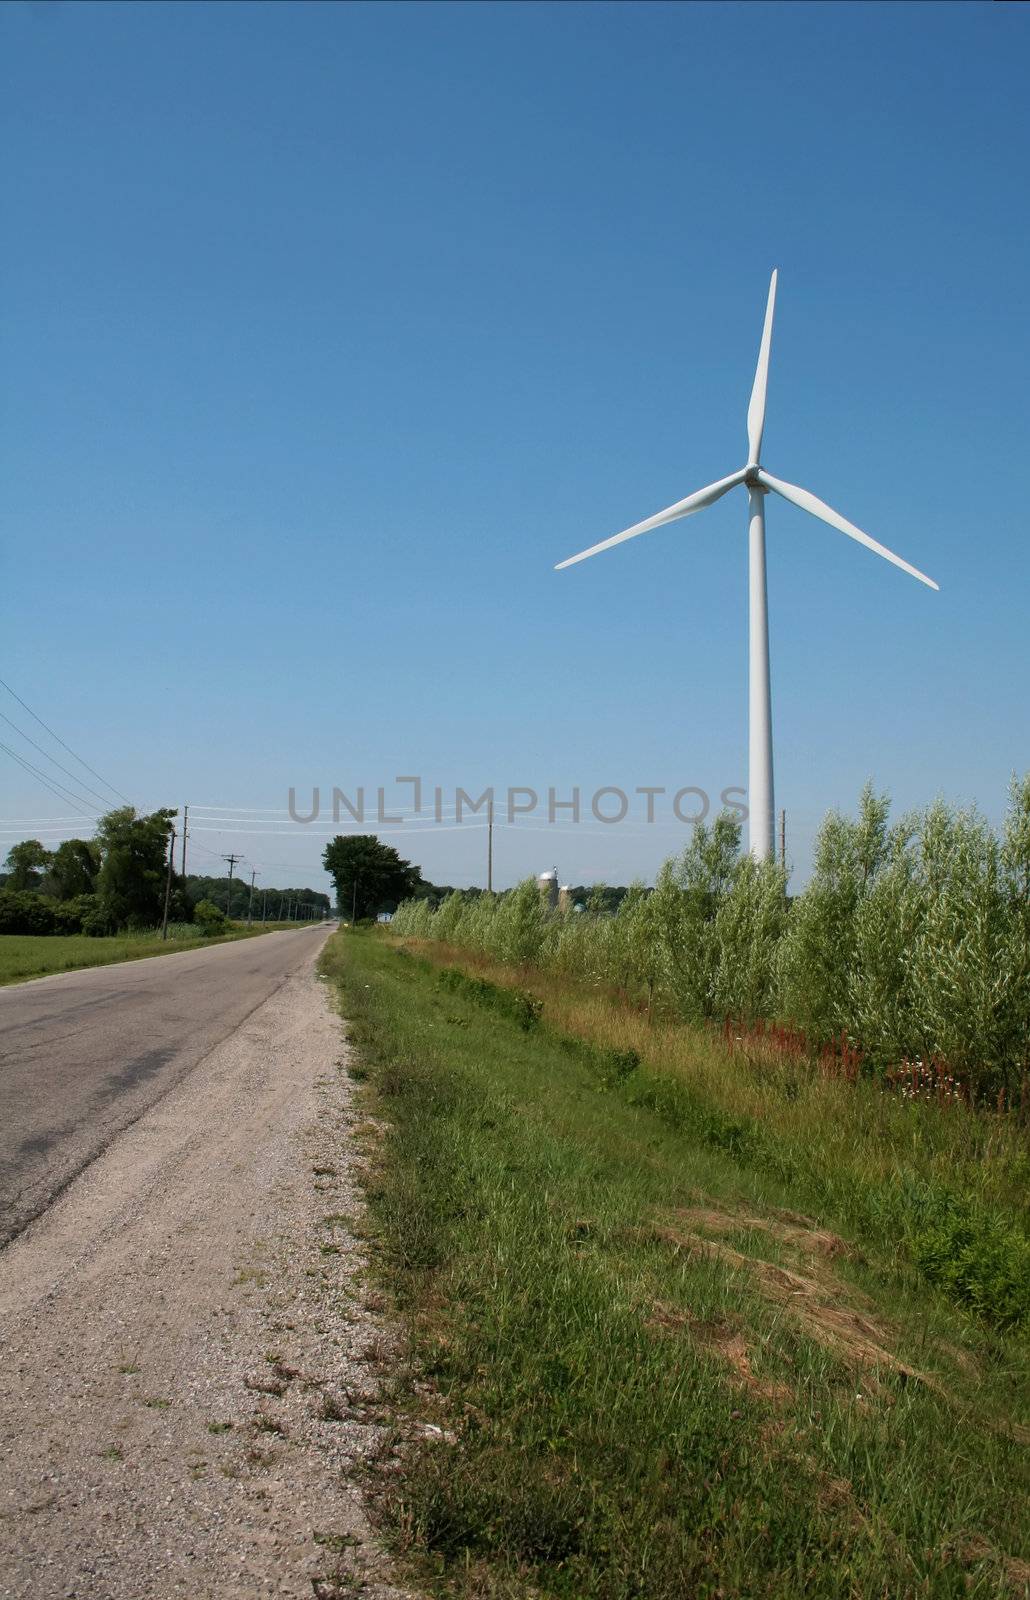 A windmill power generator on the side of the road in the middle of farm land.